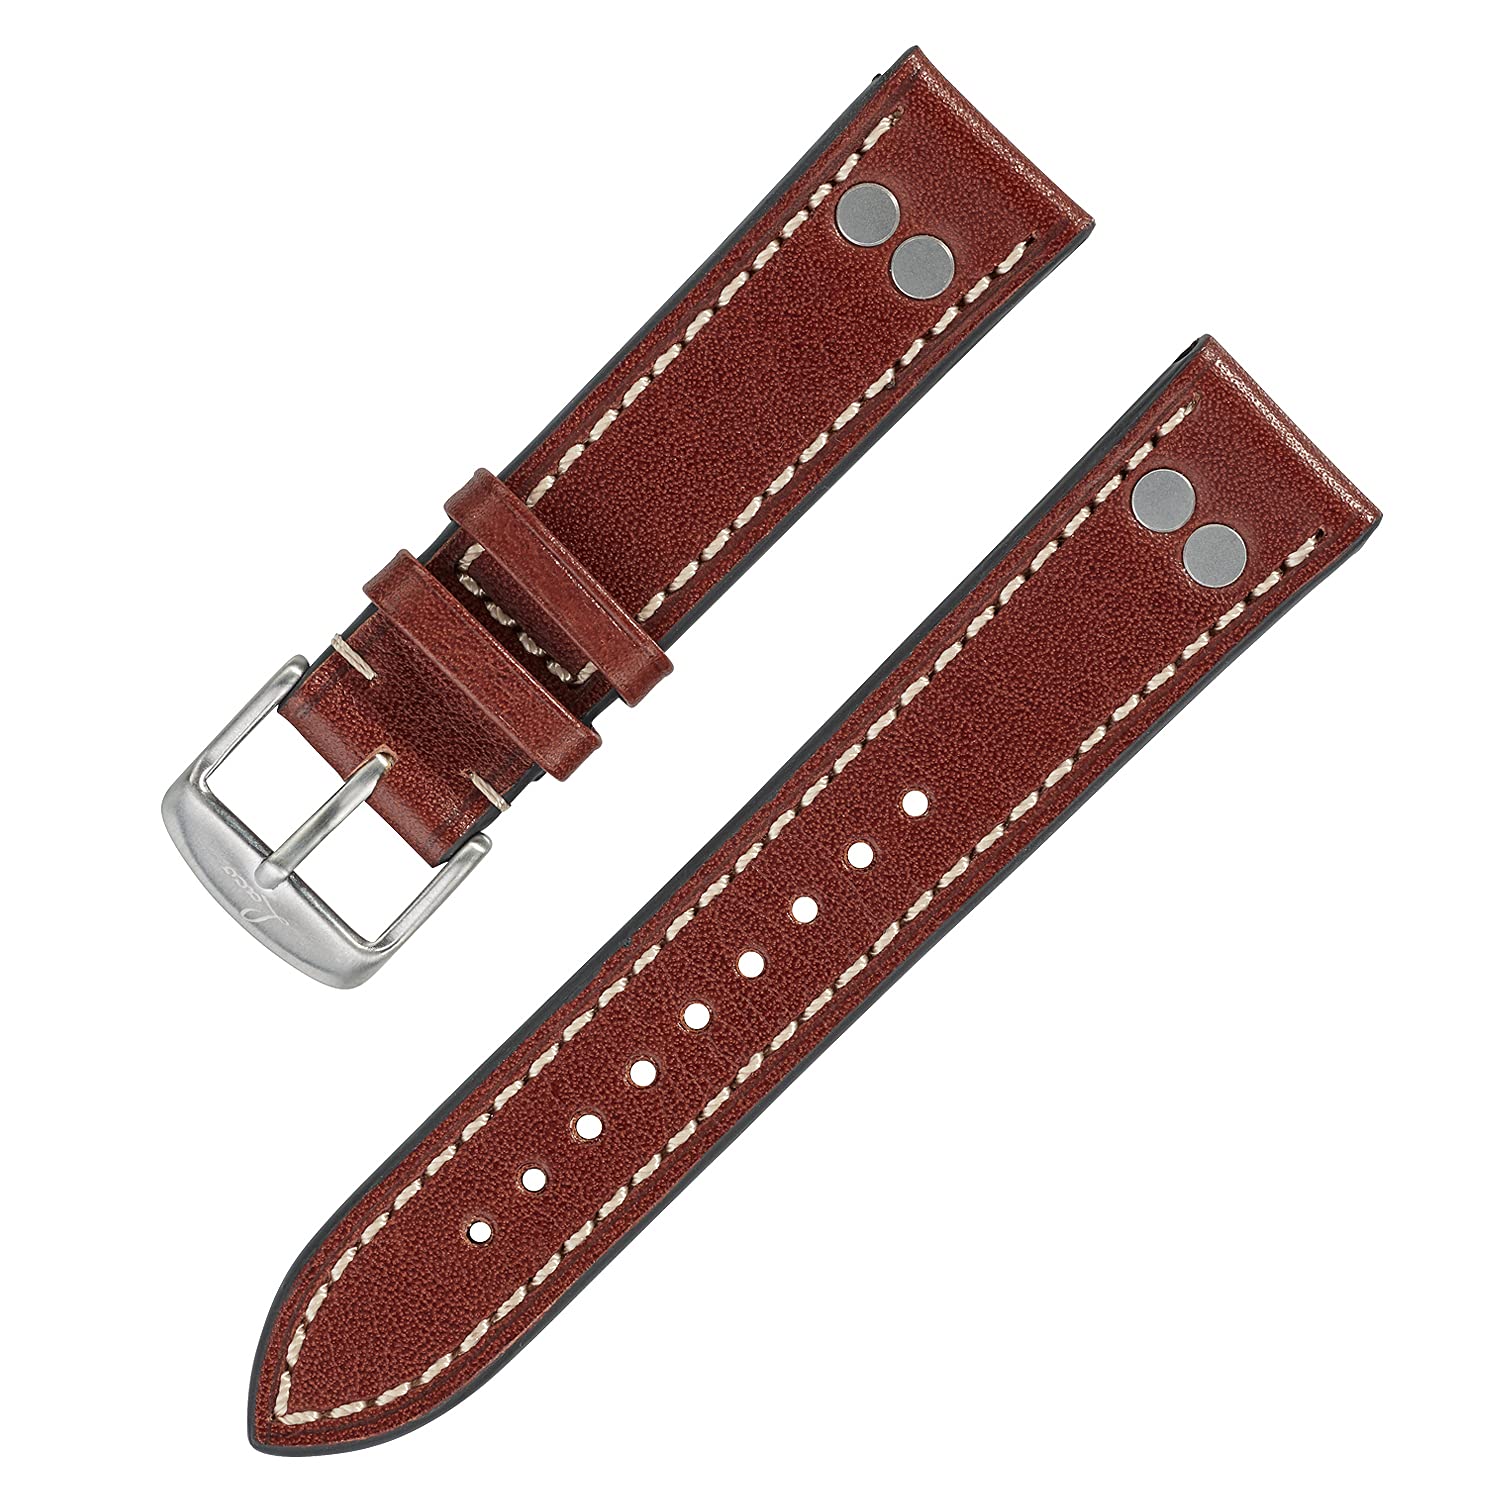 Laco Aviator Watches Leather Strap - 18mm - 18.5cm Long - Rivets - Strap - Unique Quality - Outstanding Workman